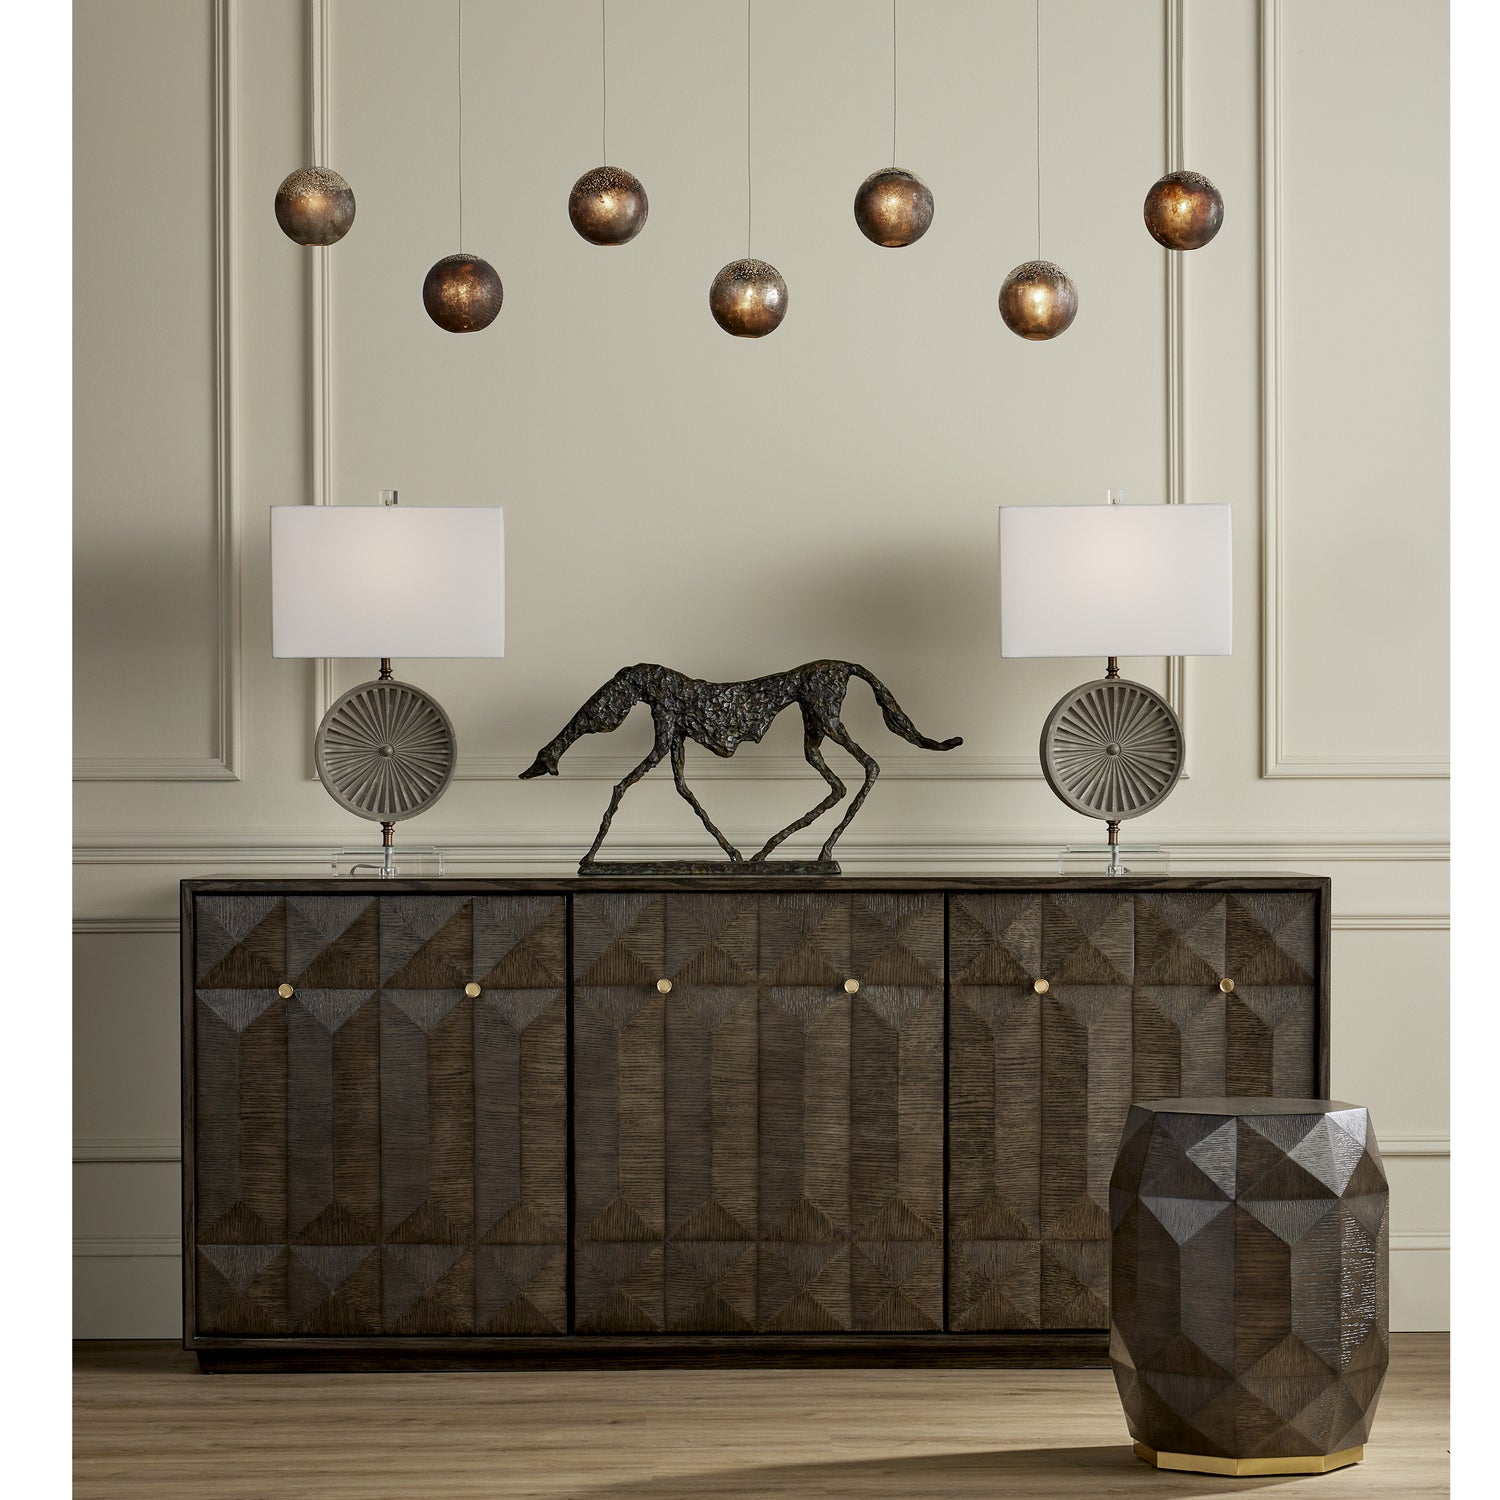 One Light Table Lamp from the Applique collection in Gray/Clear/Antique Brass finish